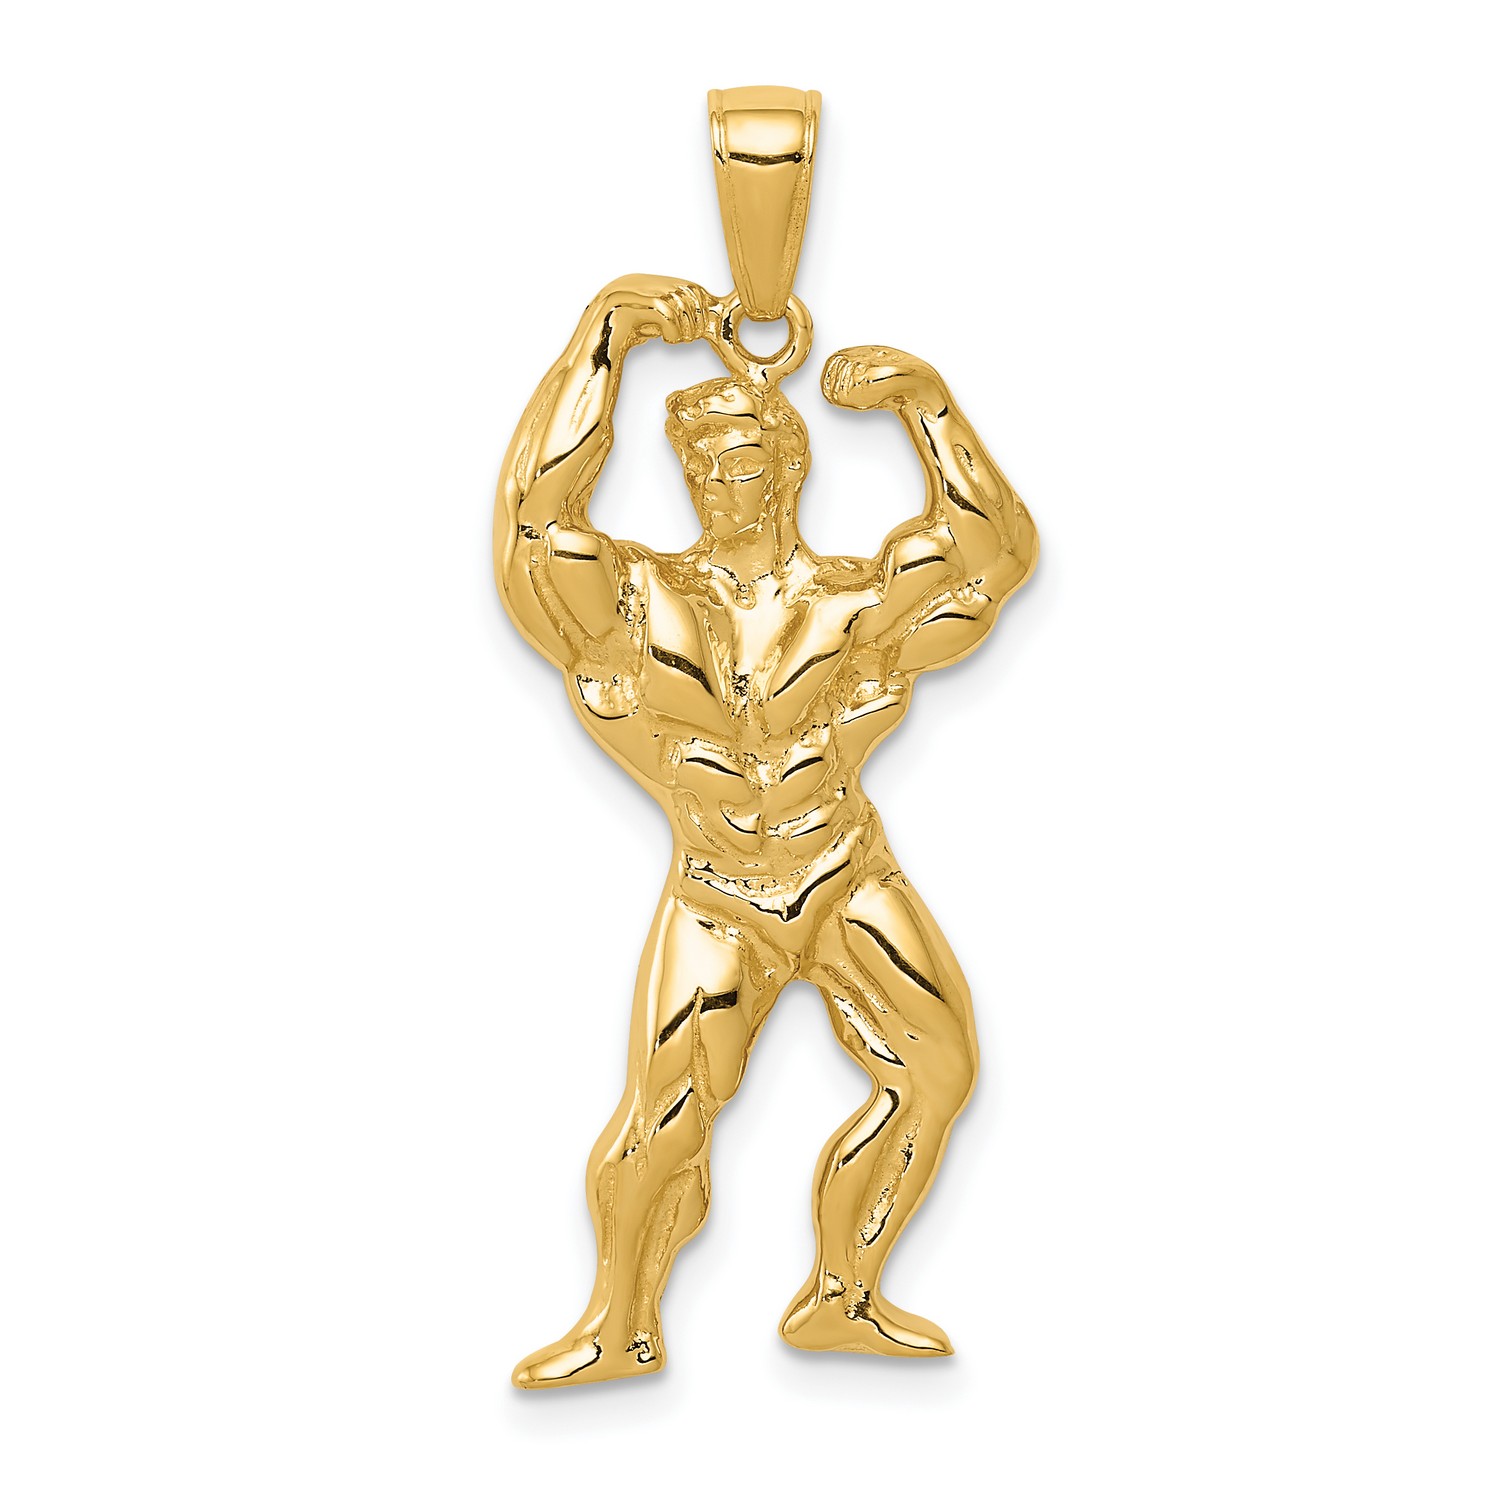 Pre-owned Jewelry Stores Network 14k Yellow Gold Flexing Weightlifter Posing Charm Pendant